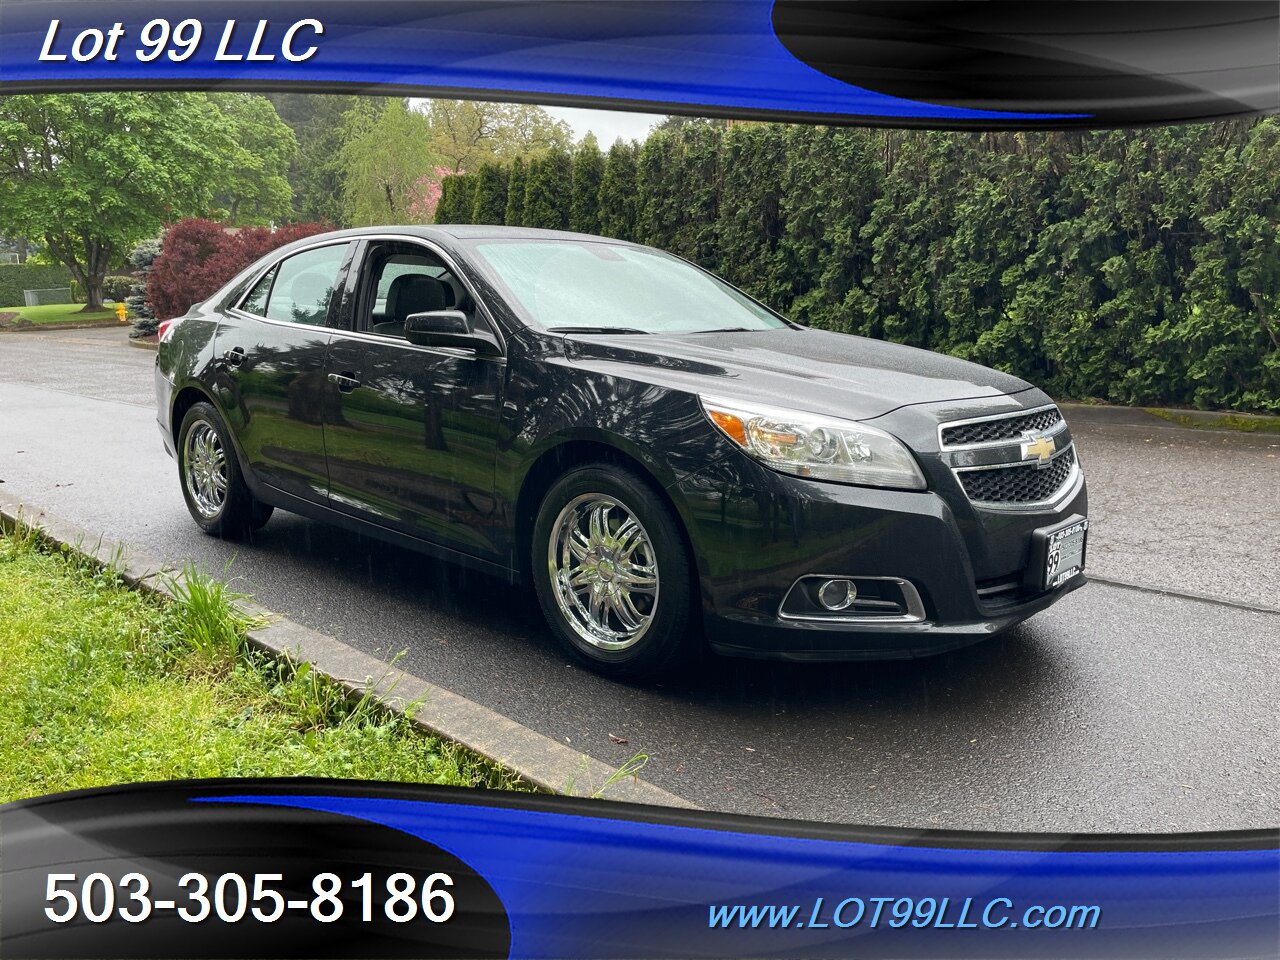 2013 Chevrolet Malibu Eco 1-Owner 58k Miles 37MPG Htd Leather Moon Roof   - Photo 4 - Milwaukie, OR 97267